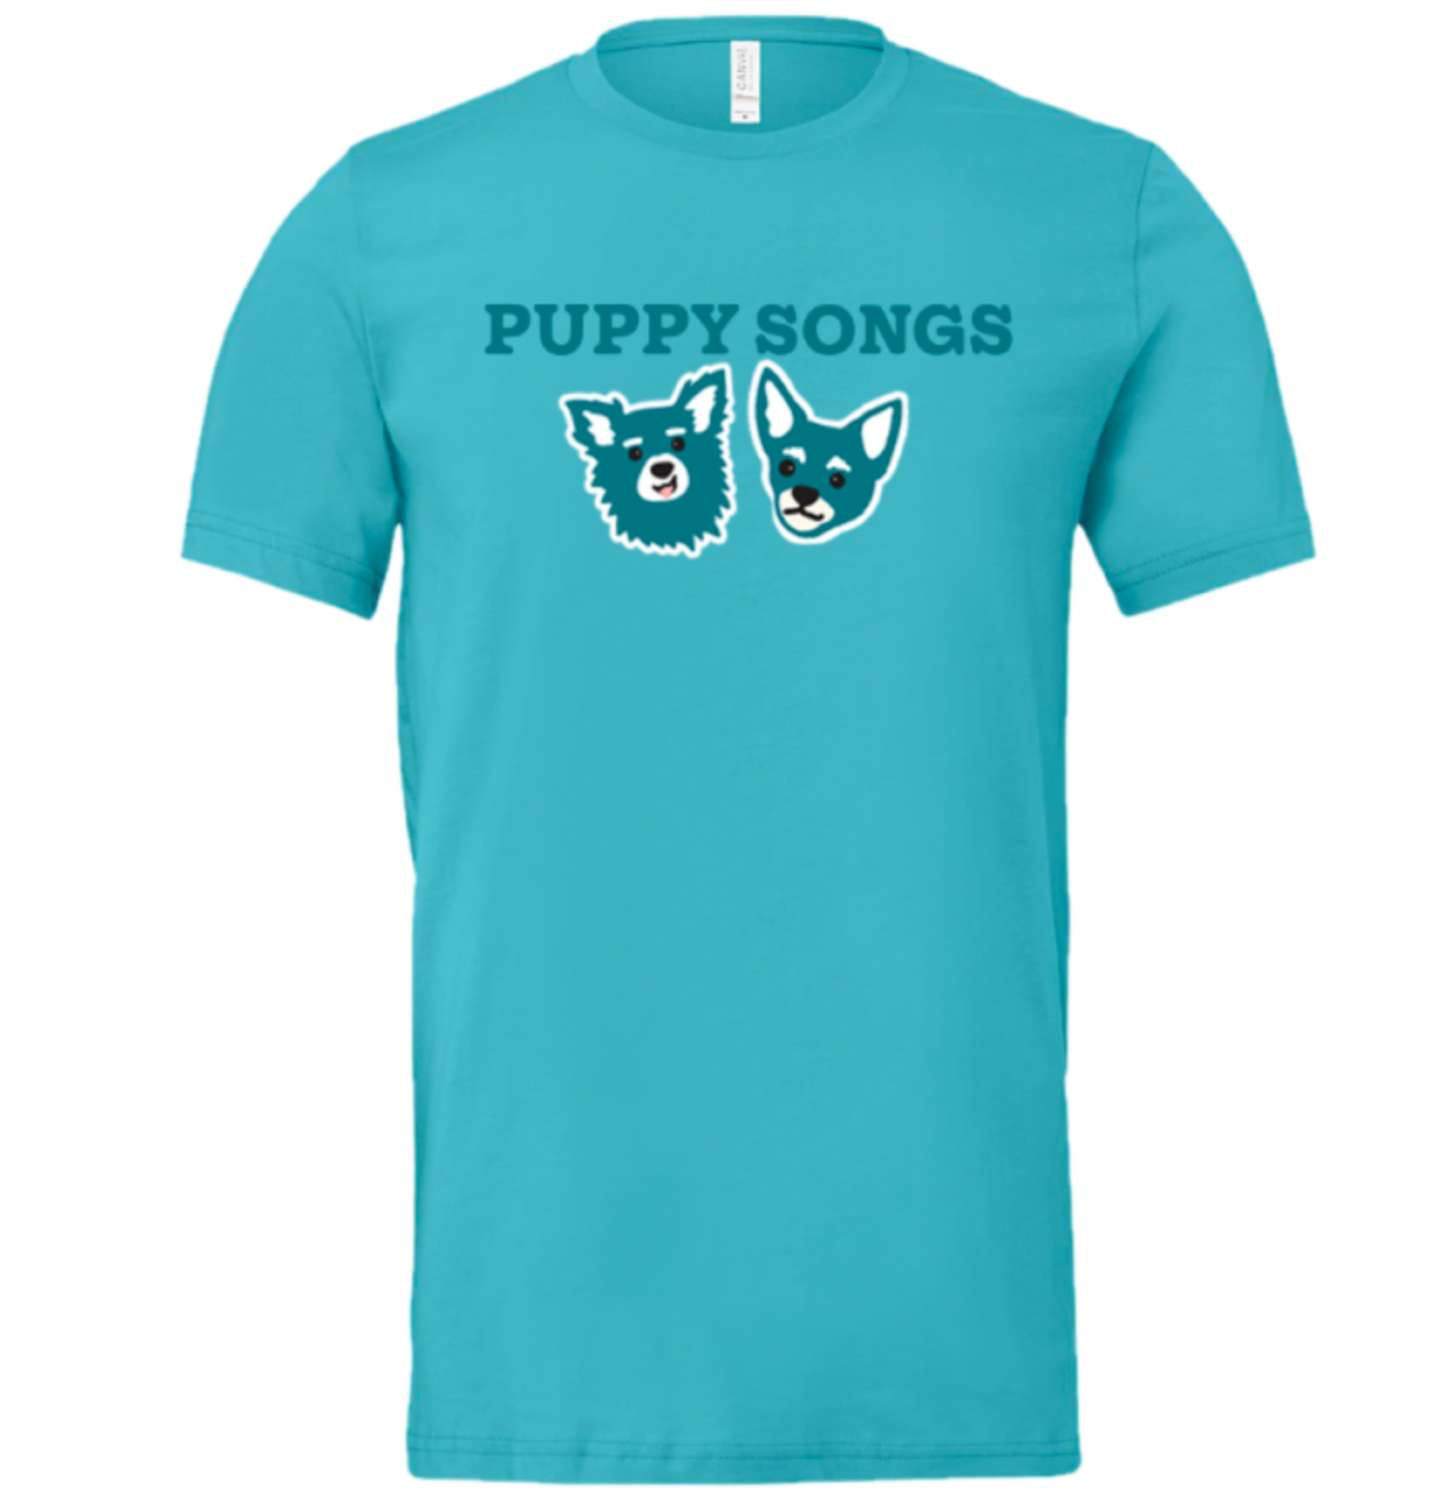 Leni and Mar Pup Logo Turquoise Tee